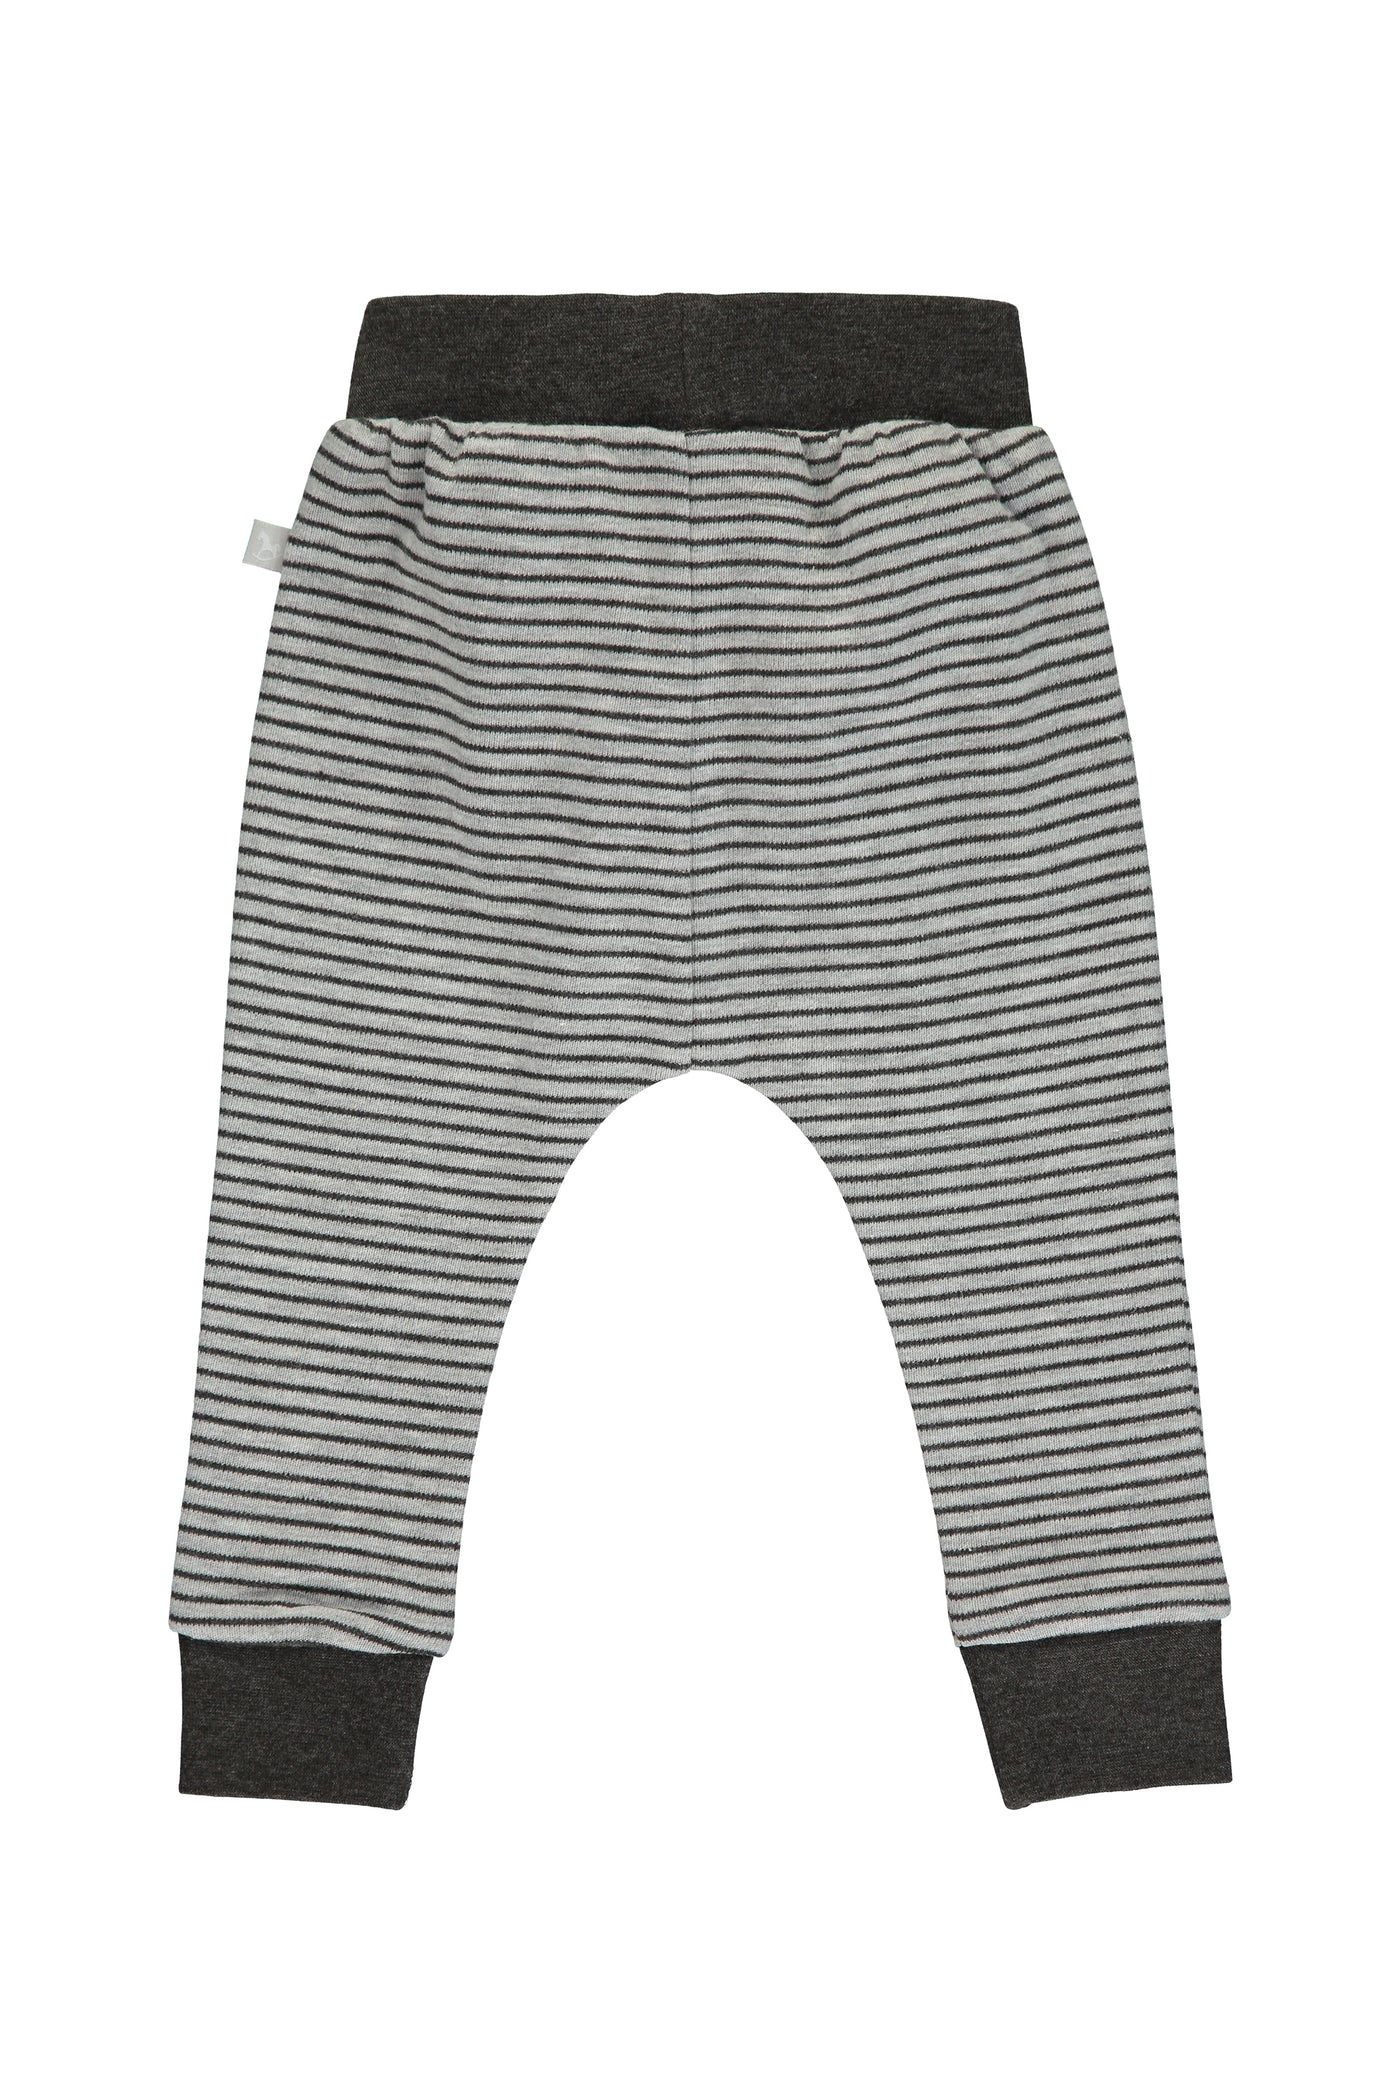 Comfy Stripey Print Pant - charcoal and grey marl